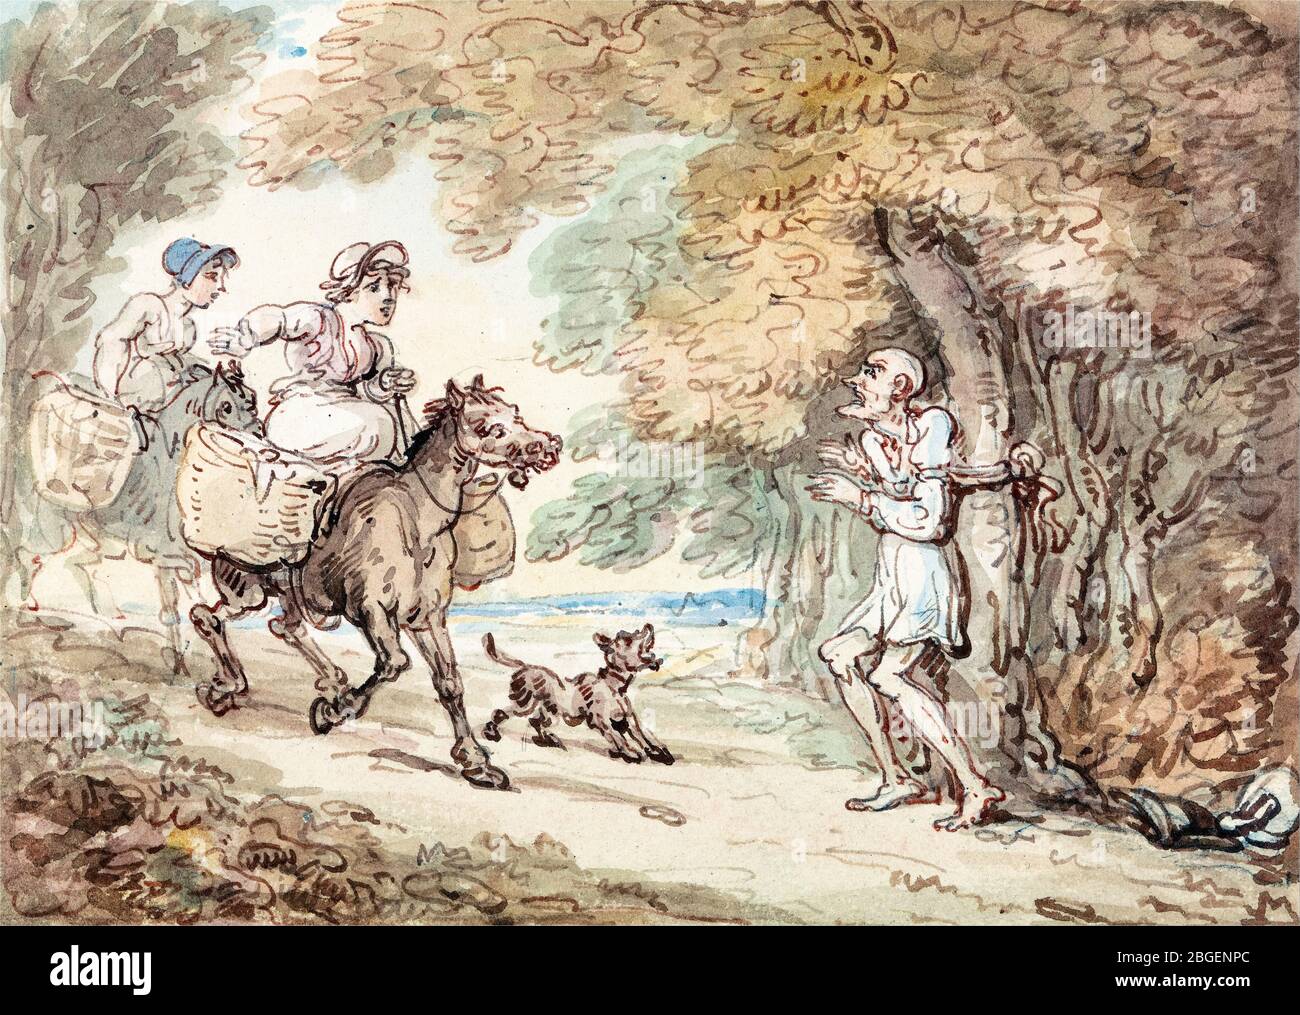 Thomas Rowlandson, Dr Syntax Bound to a Tree by Highwaymen, drawing, 1820 Stock Photo